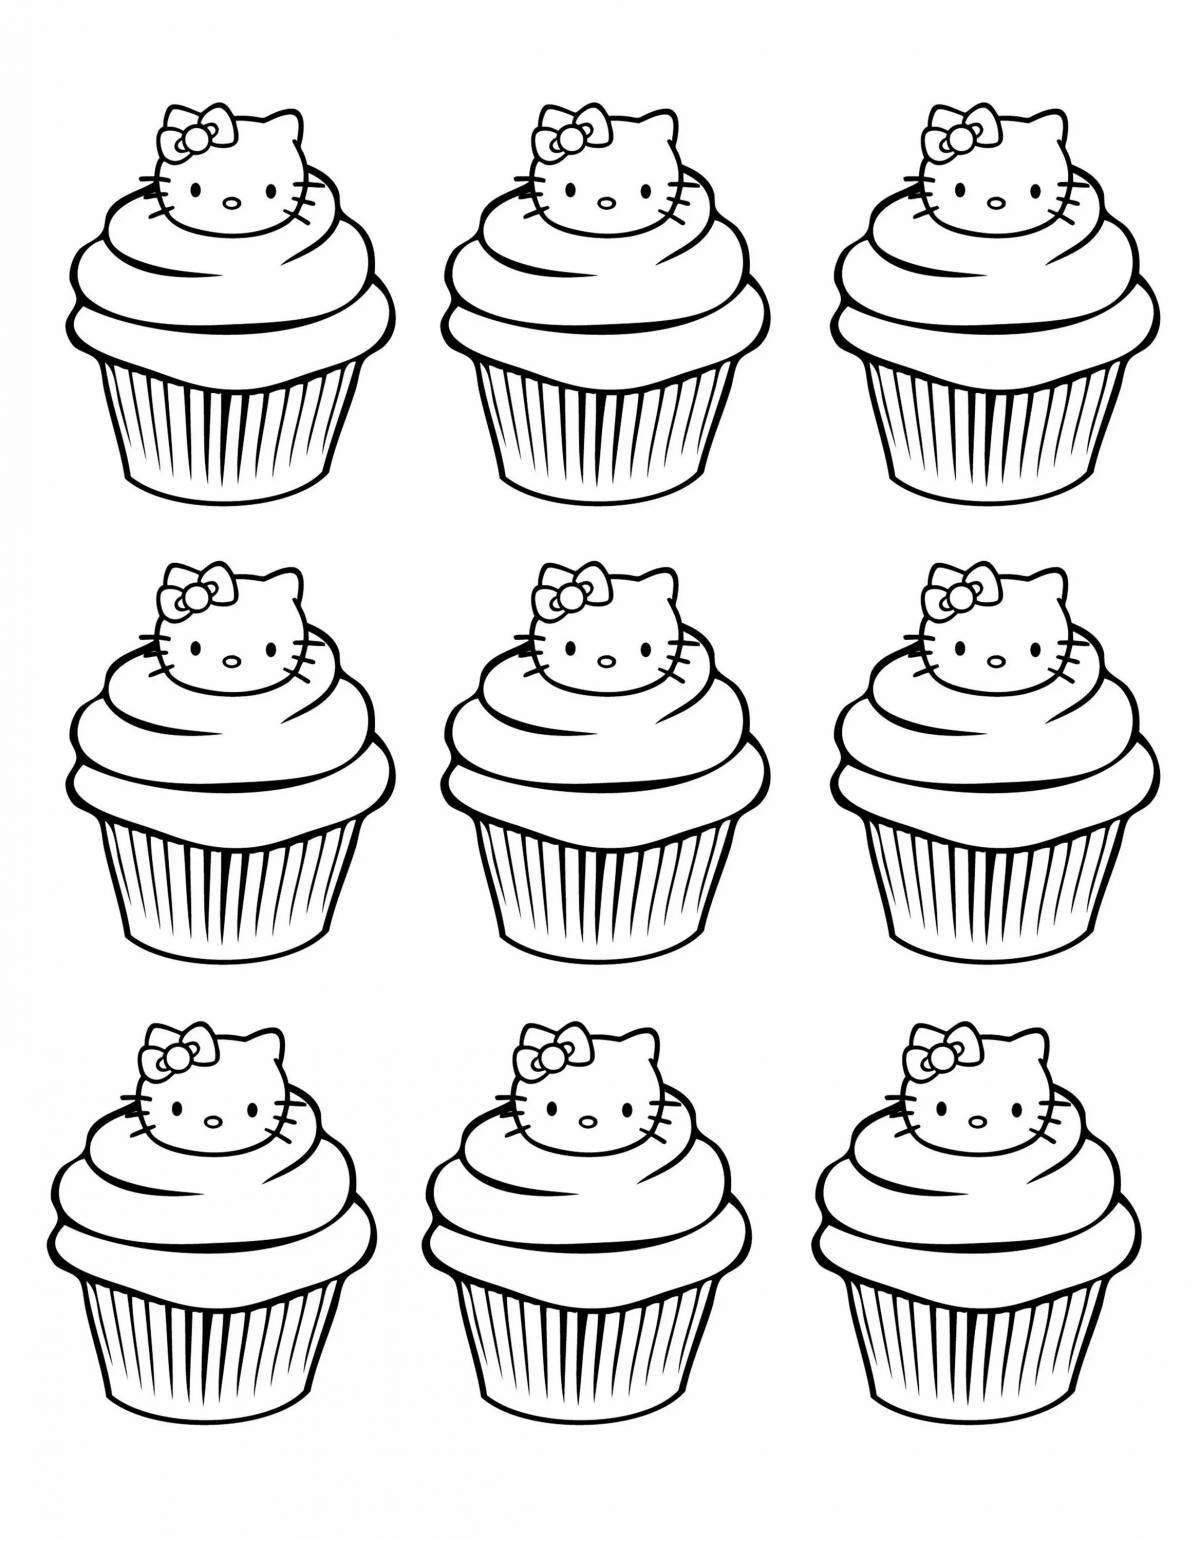 Fun coloring pages with small pictures